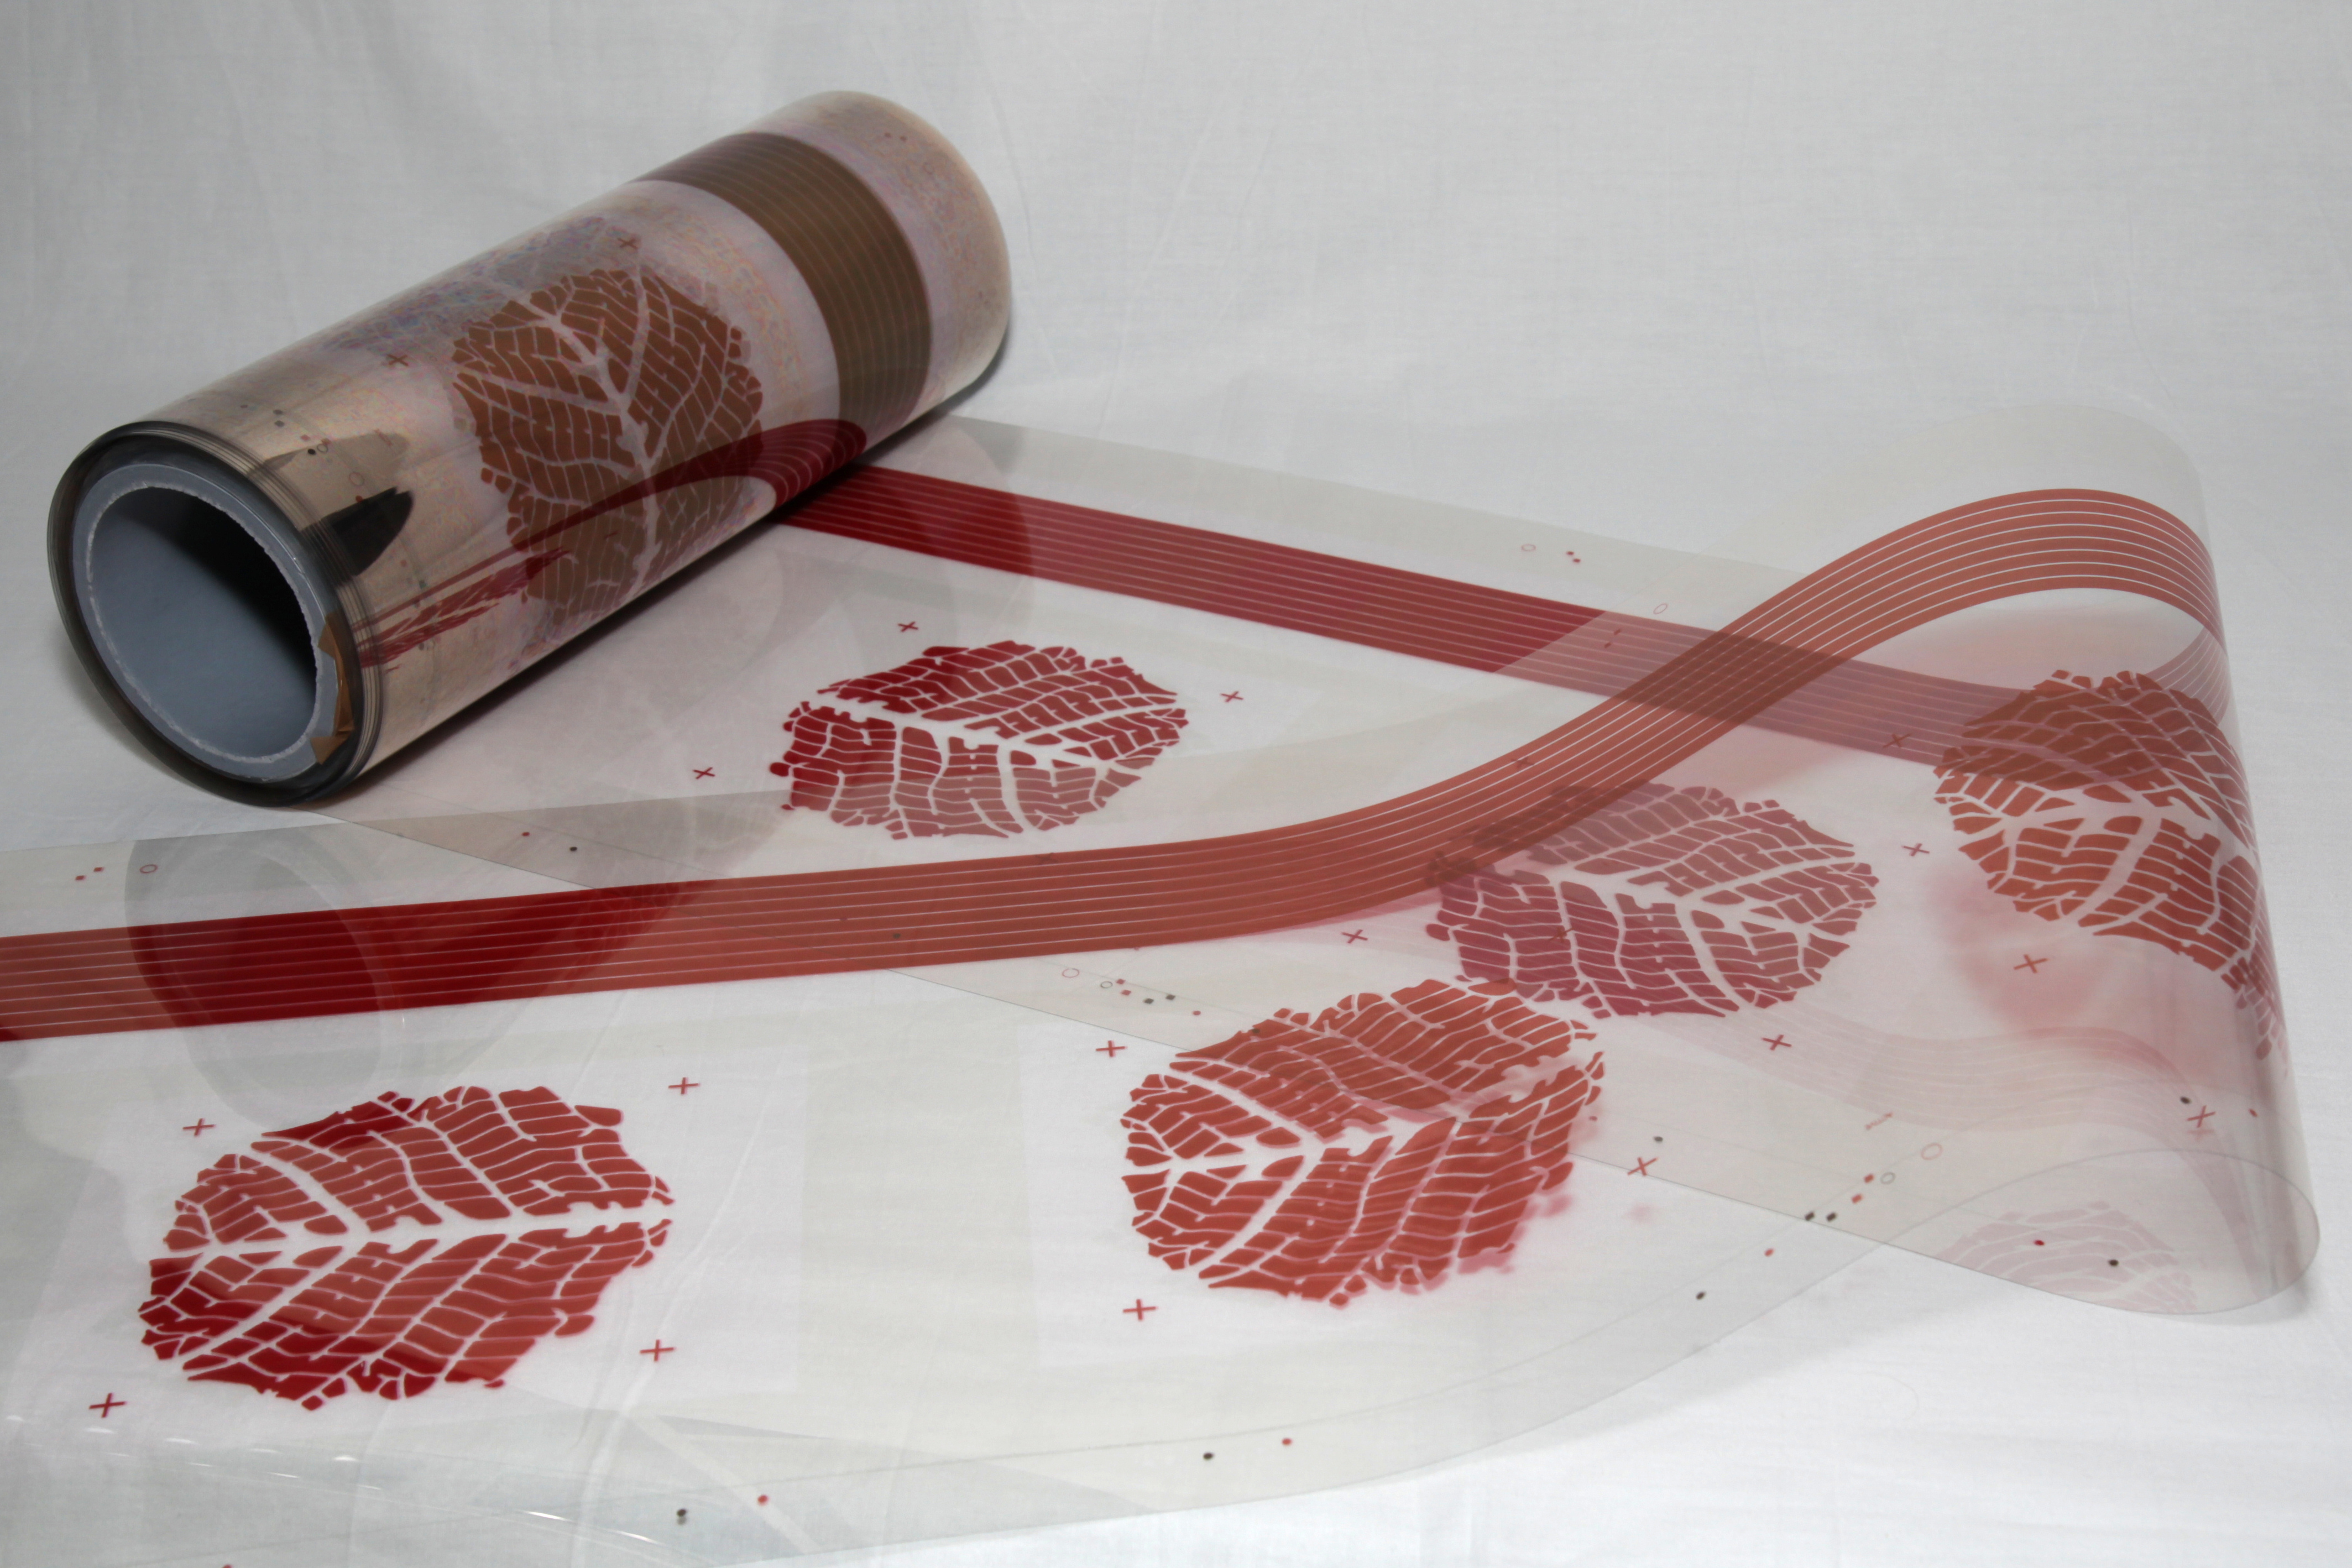 Flexible, Decorative, Recyclable Solar Panels Harvest Energy From Interior Lighting